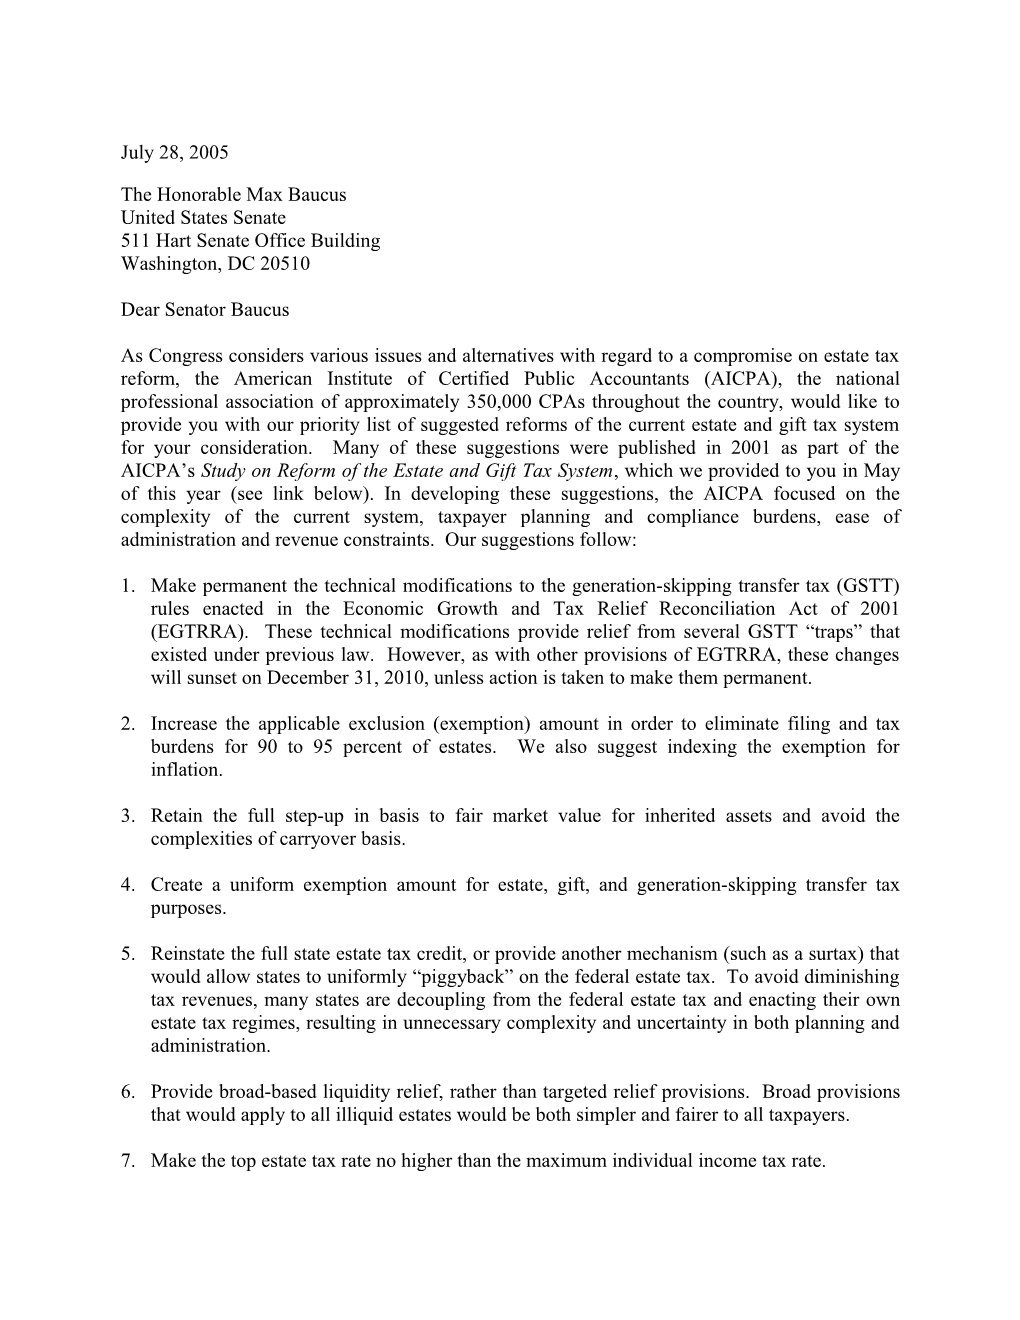 AICPA Letter to Congress on Estate Tax Reform - July 28, 2005